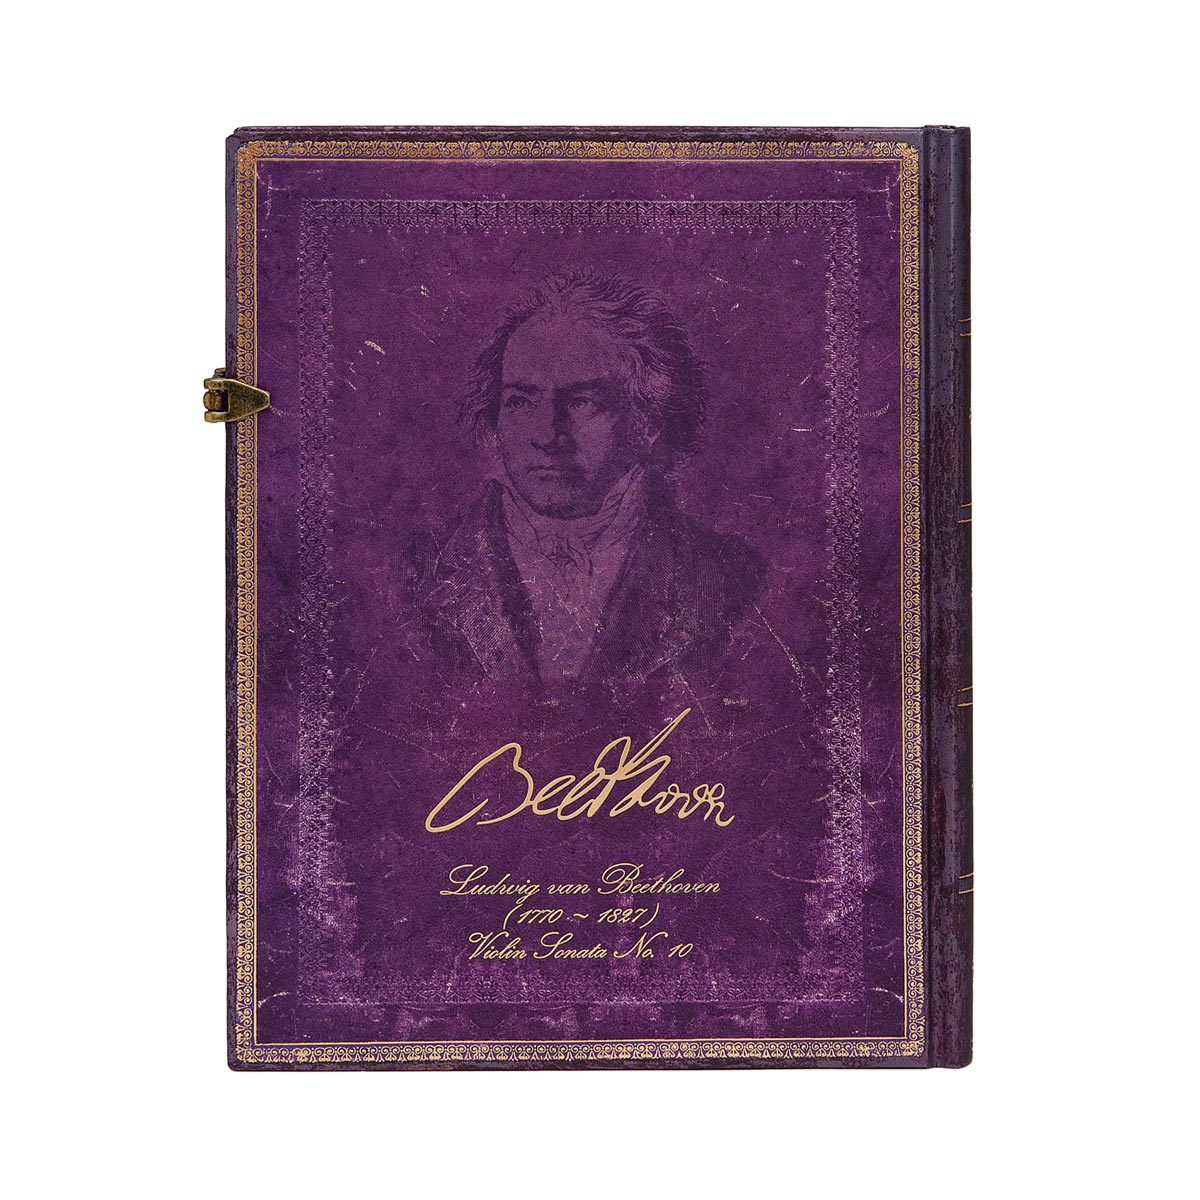 Paperblanks Beethoven's 250th Birthday 7 x 9 Inch Ultra